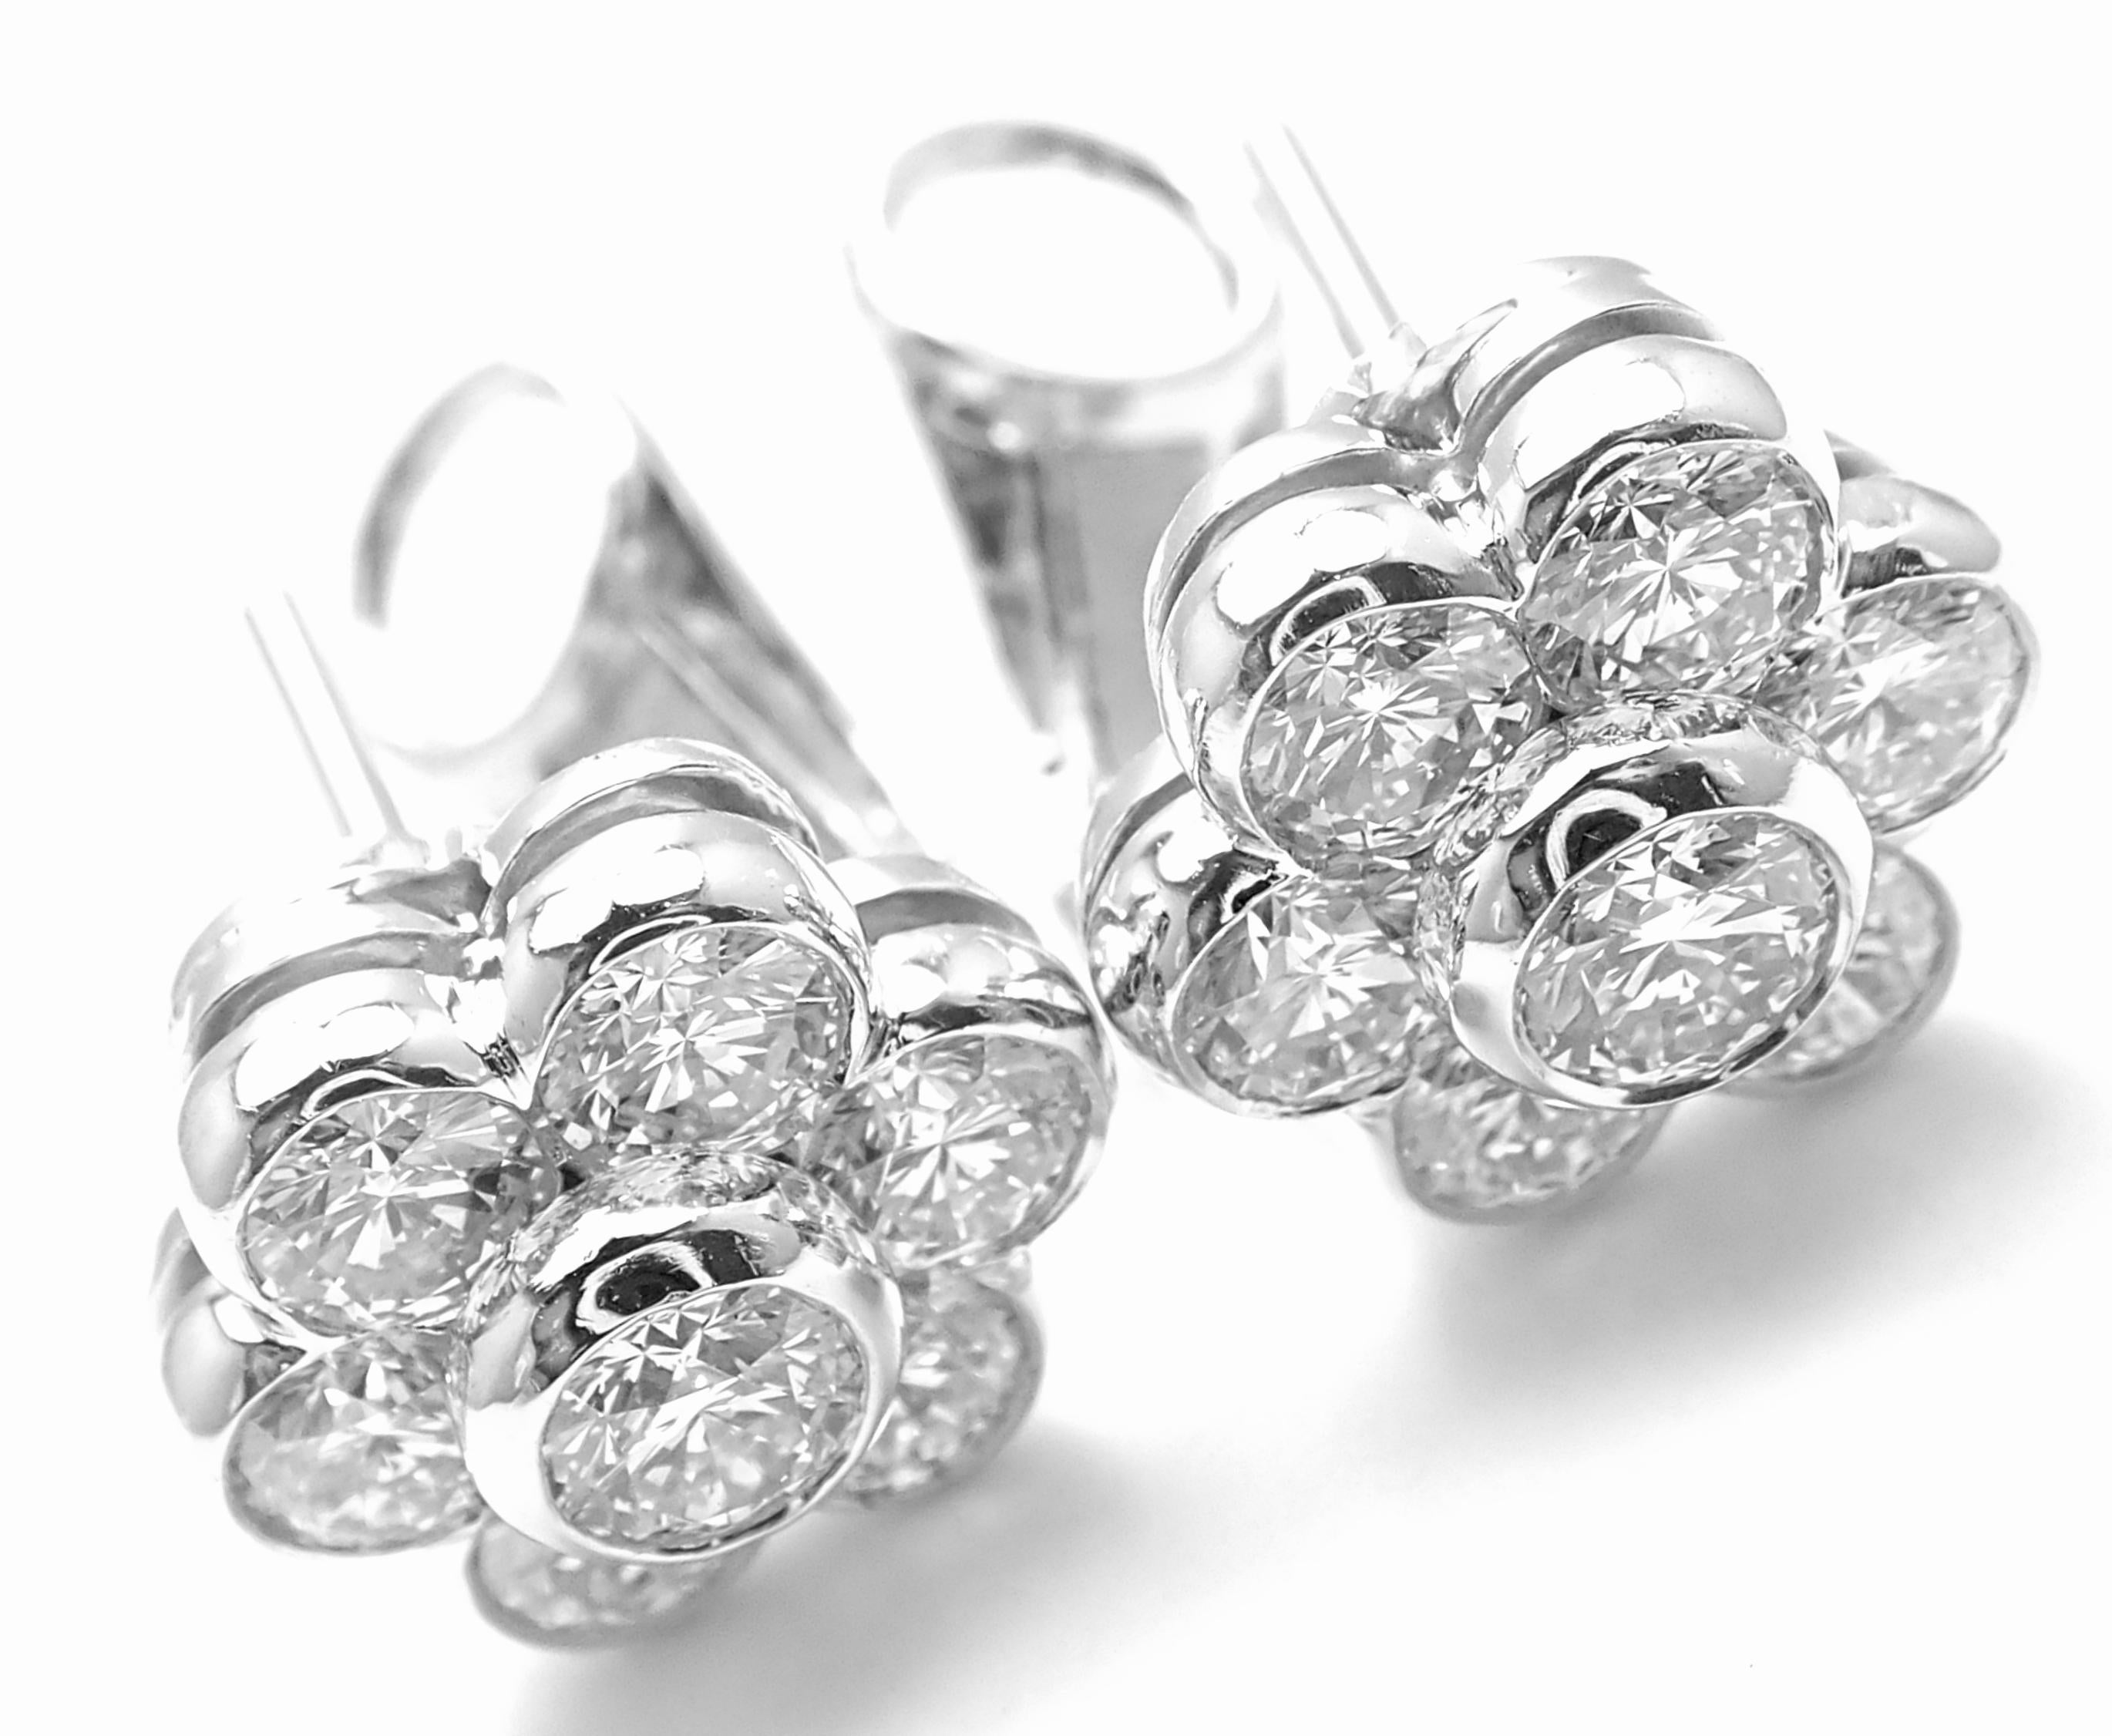 Platinum Diamond FLower Earrings by Van Cleef & Arpels. 
With 13 round brilliant cut diamonds VVS1 clarity, E color total weight approx. 3.25ct
These earrings come with VCA service paper from NYC and a VCA box.
***These earrings are for pierced